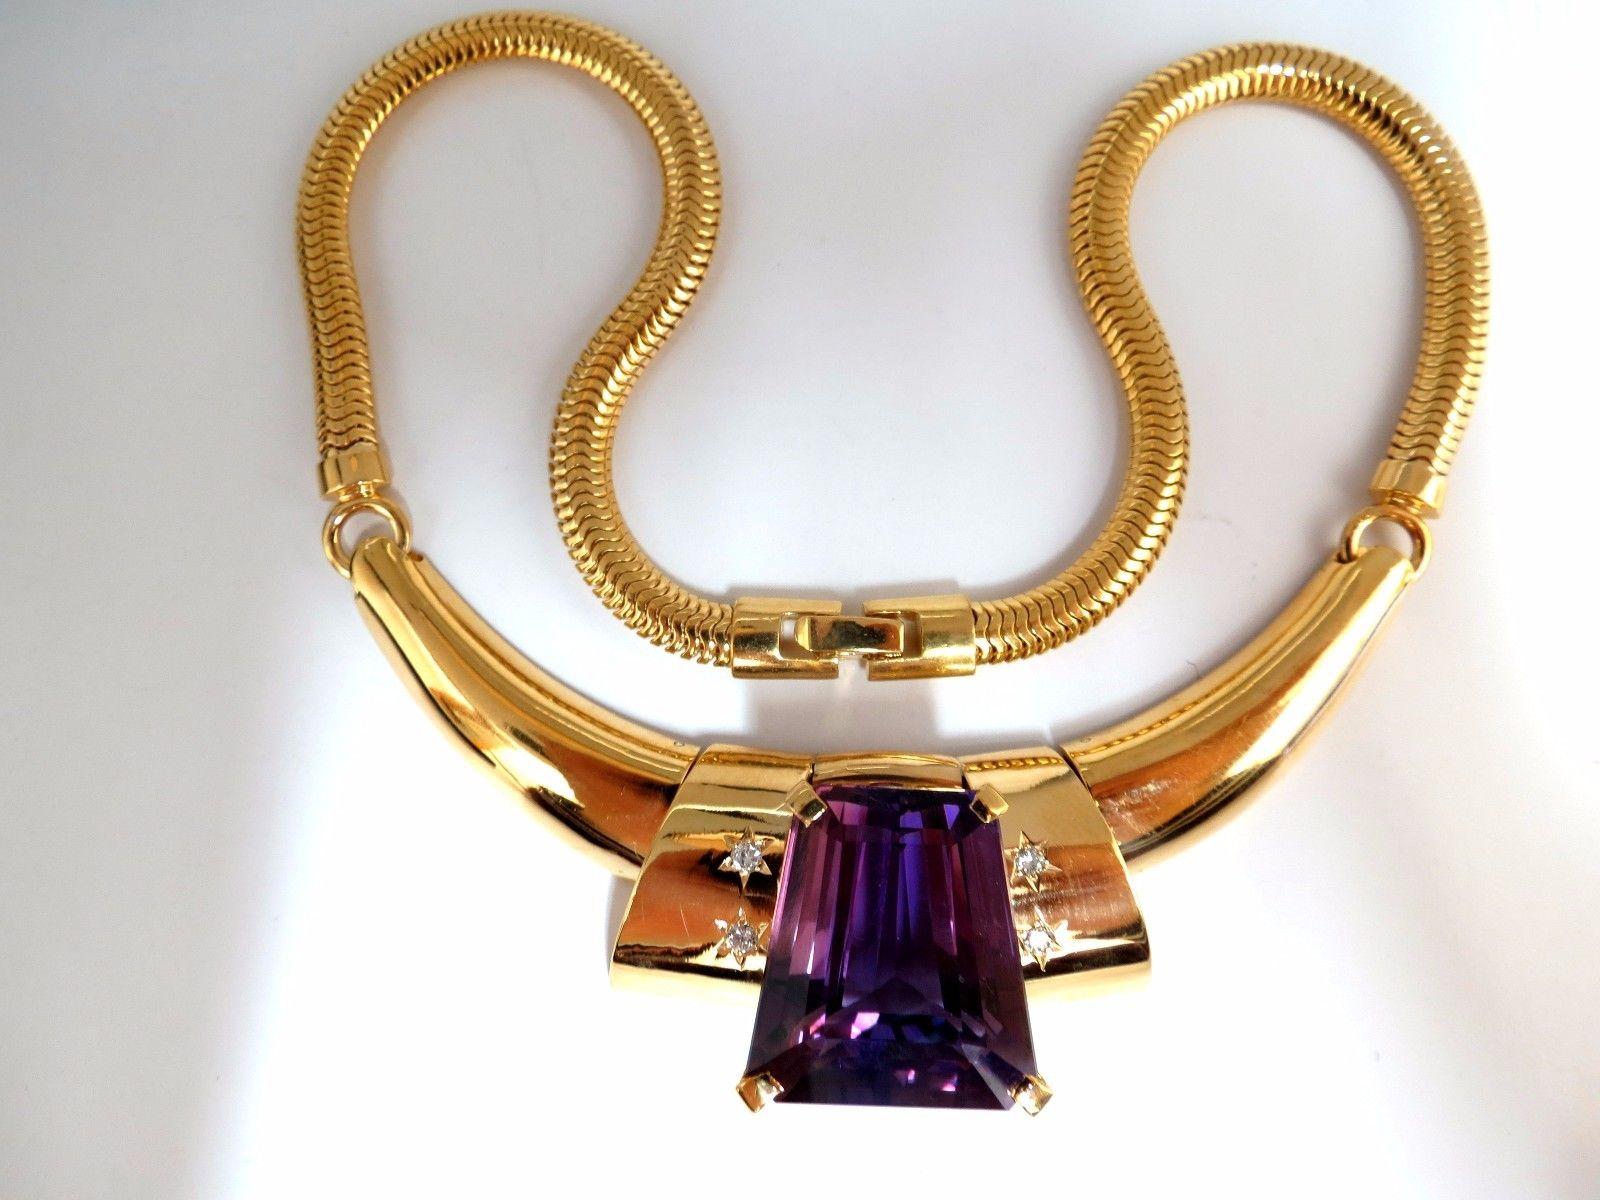 GIA Certified 40.00ct Natural Amethyst Diamond Necklace 14kt Art Deco Class 4